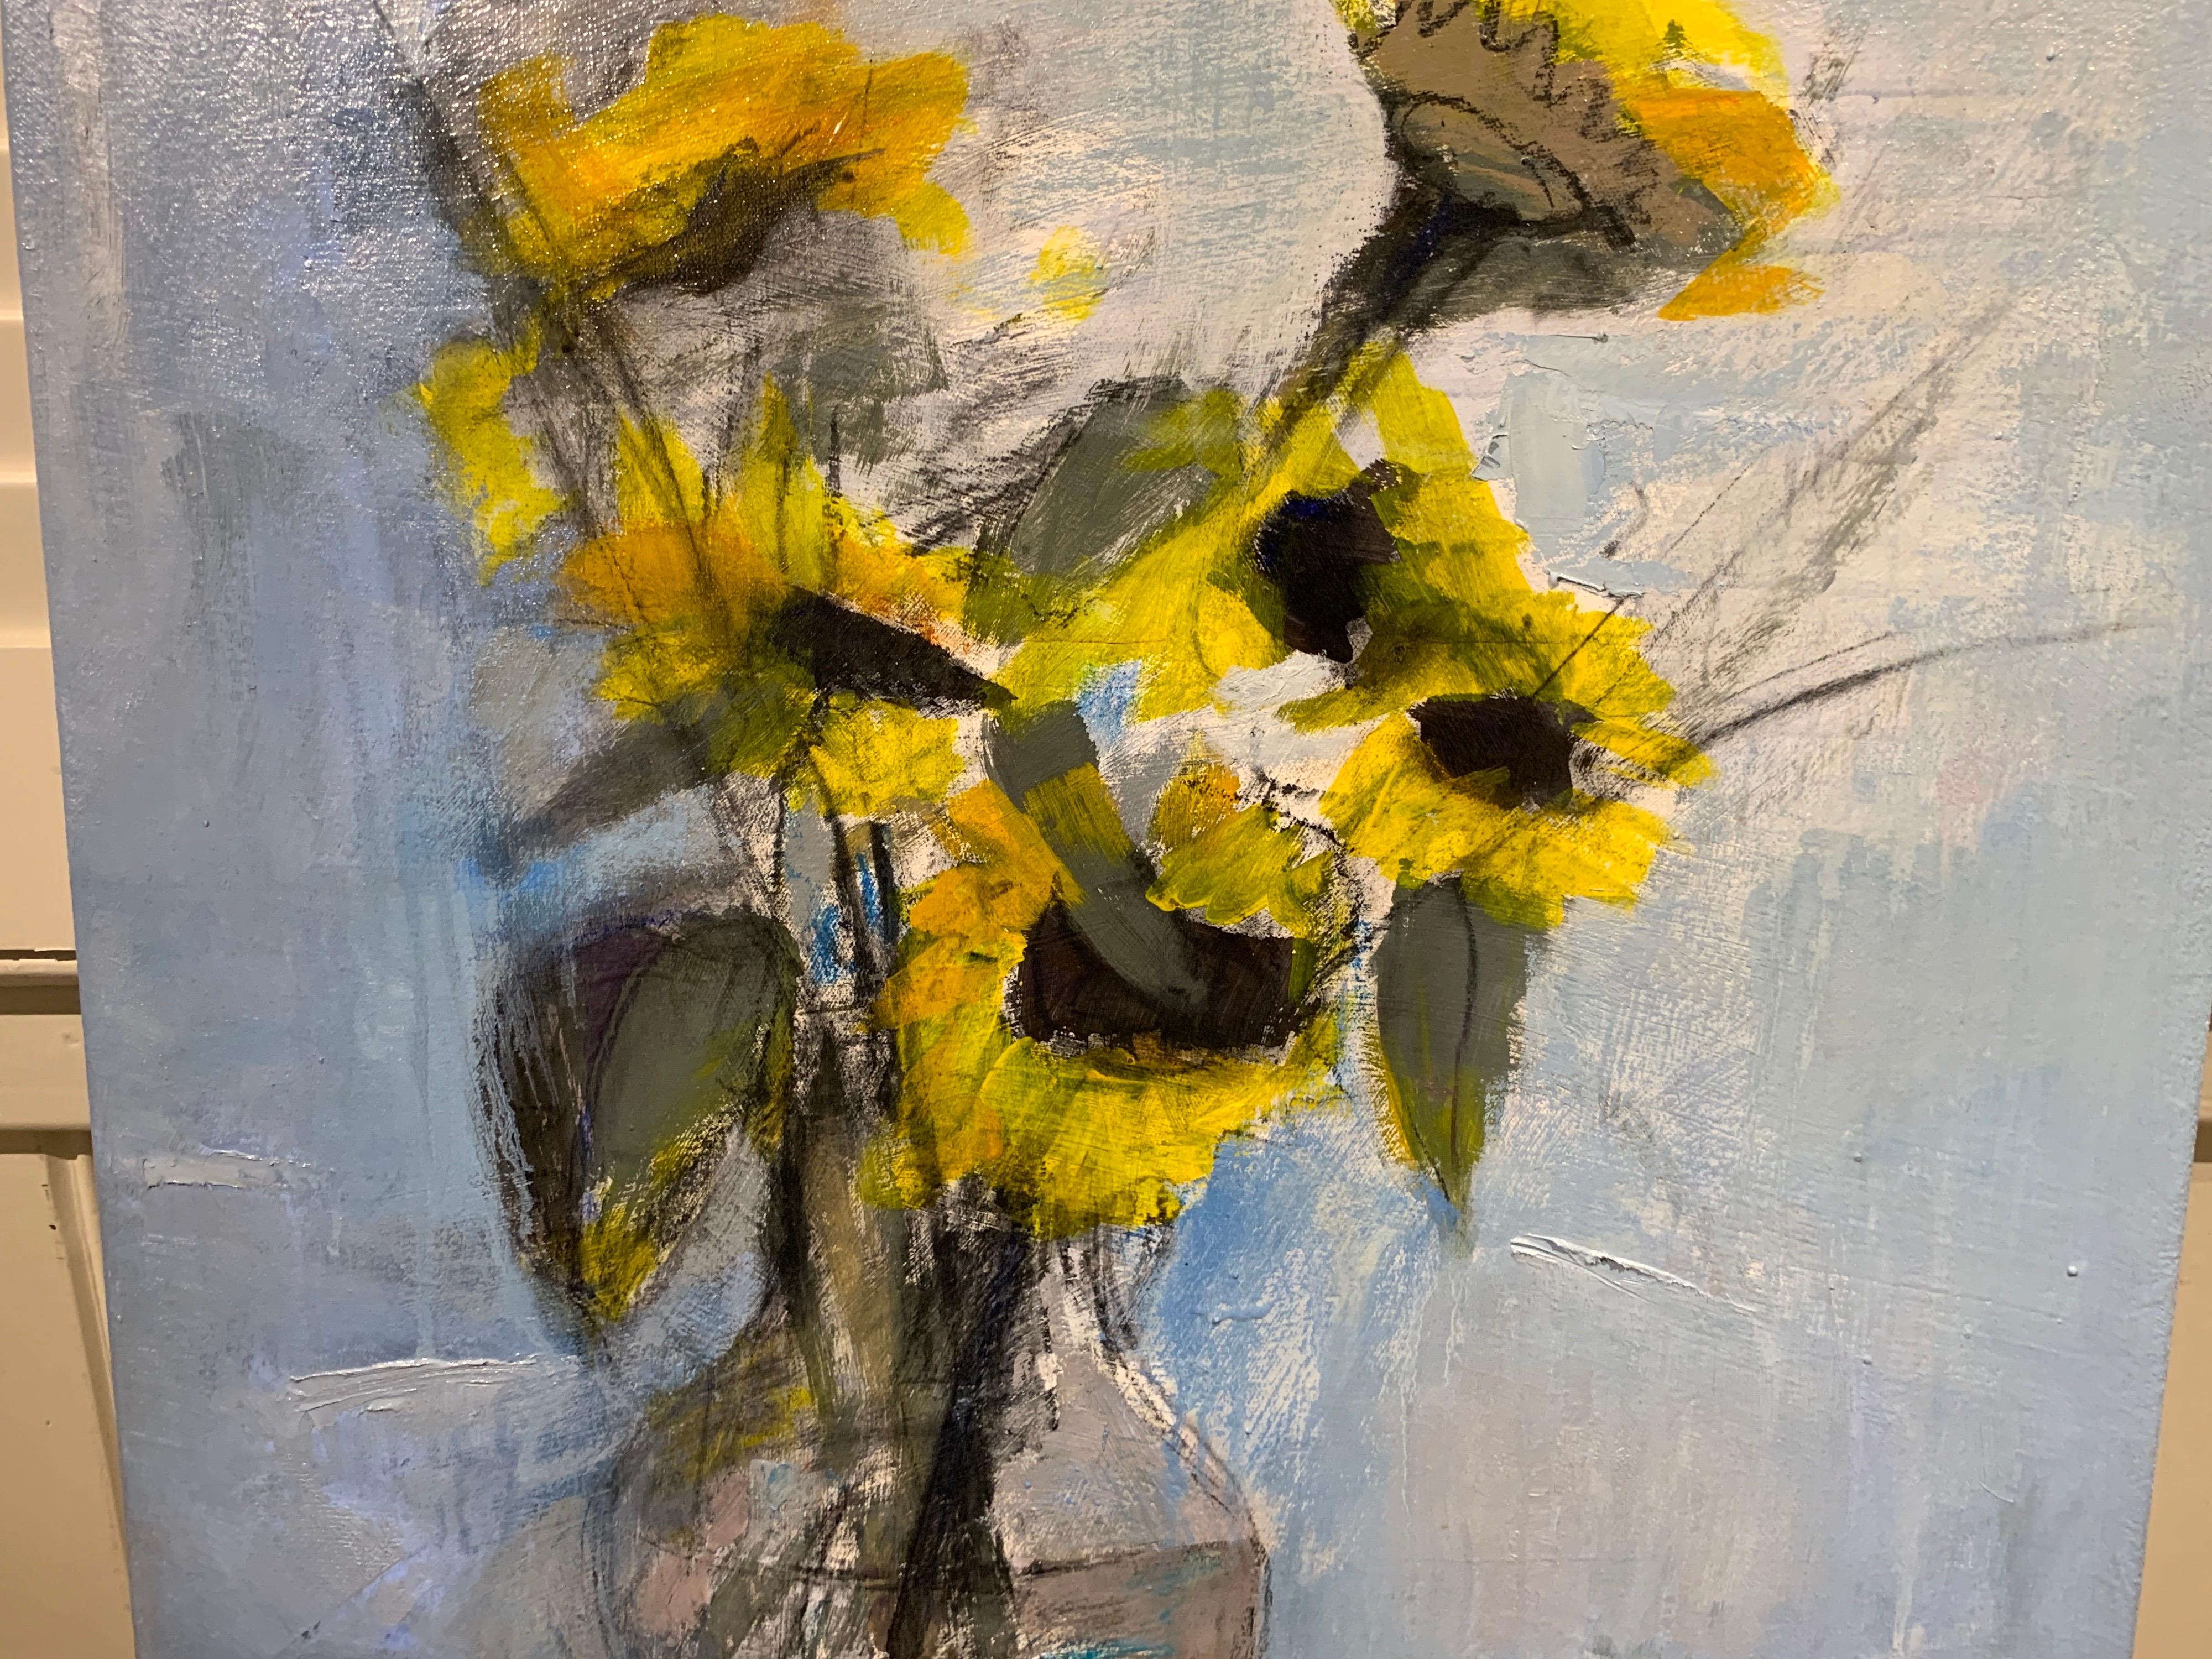 Farmers Market Sunflowers by Sharon Hockfield, Contemporary Floral Still Life 5